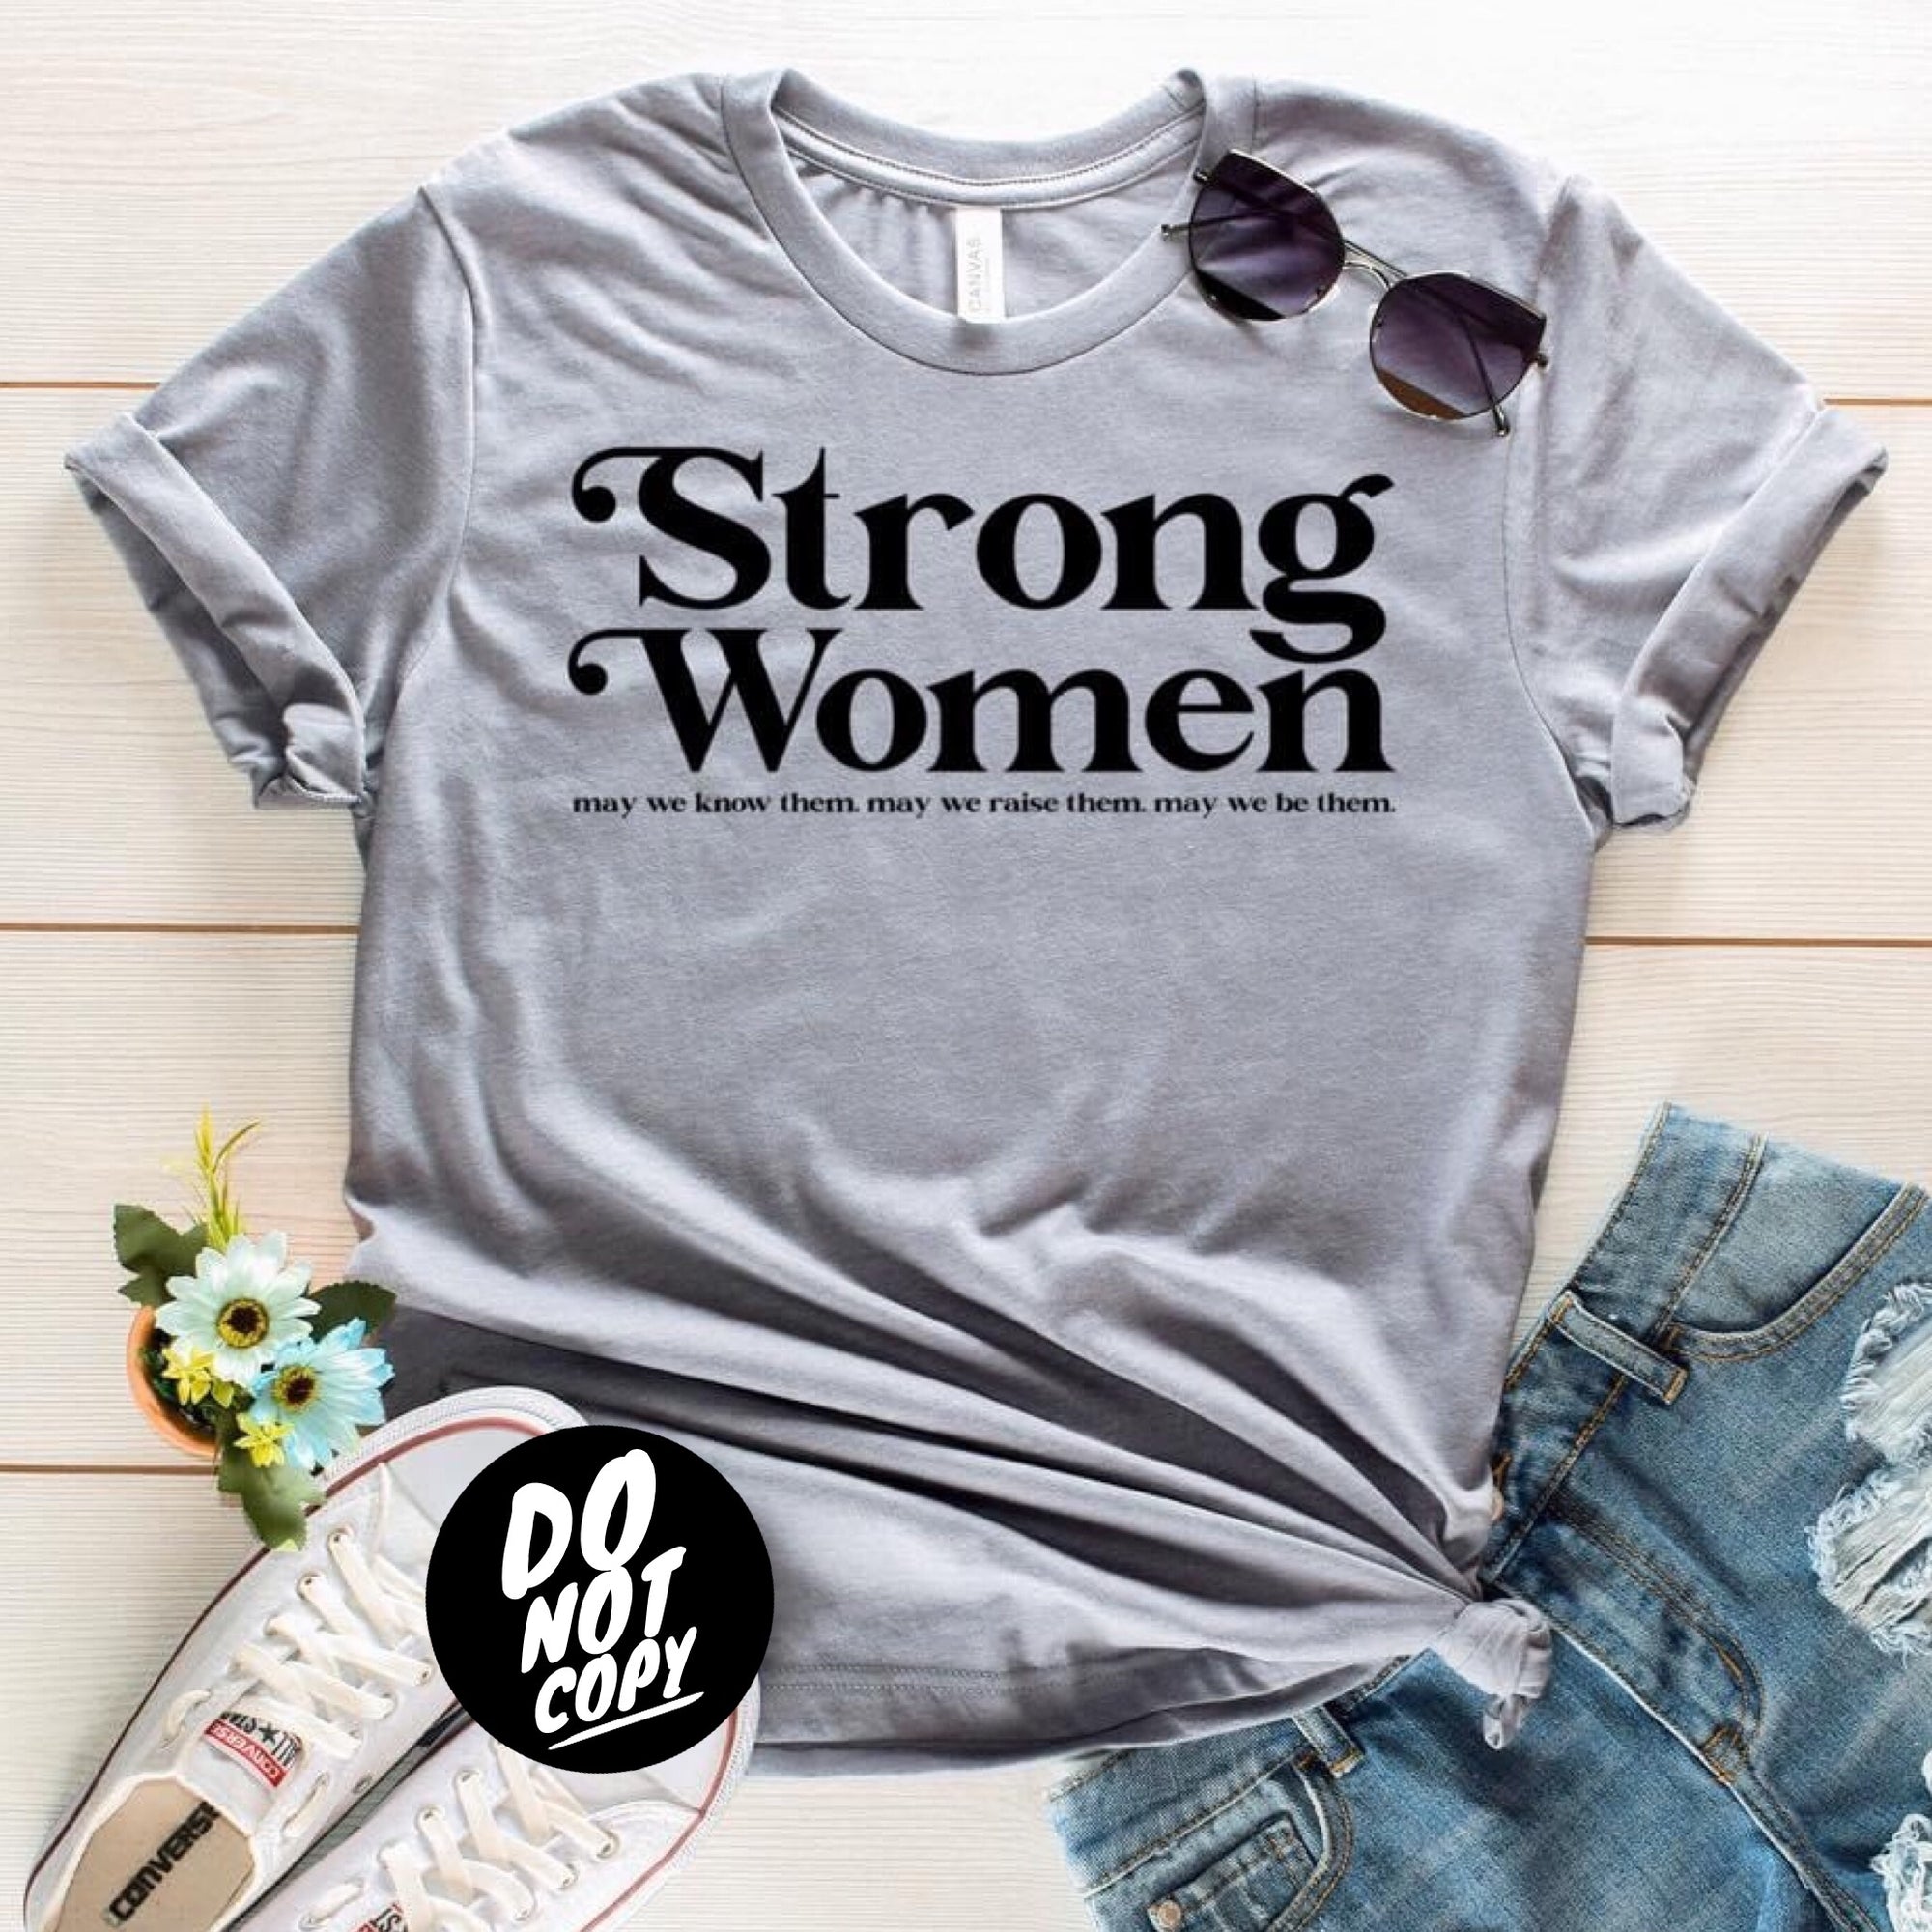 Strong Women May We Know Them. May We Raise Them. May We Be Them.